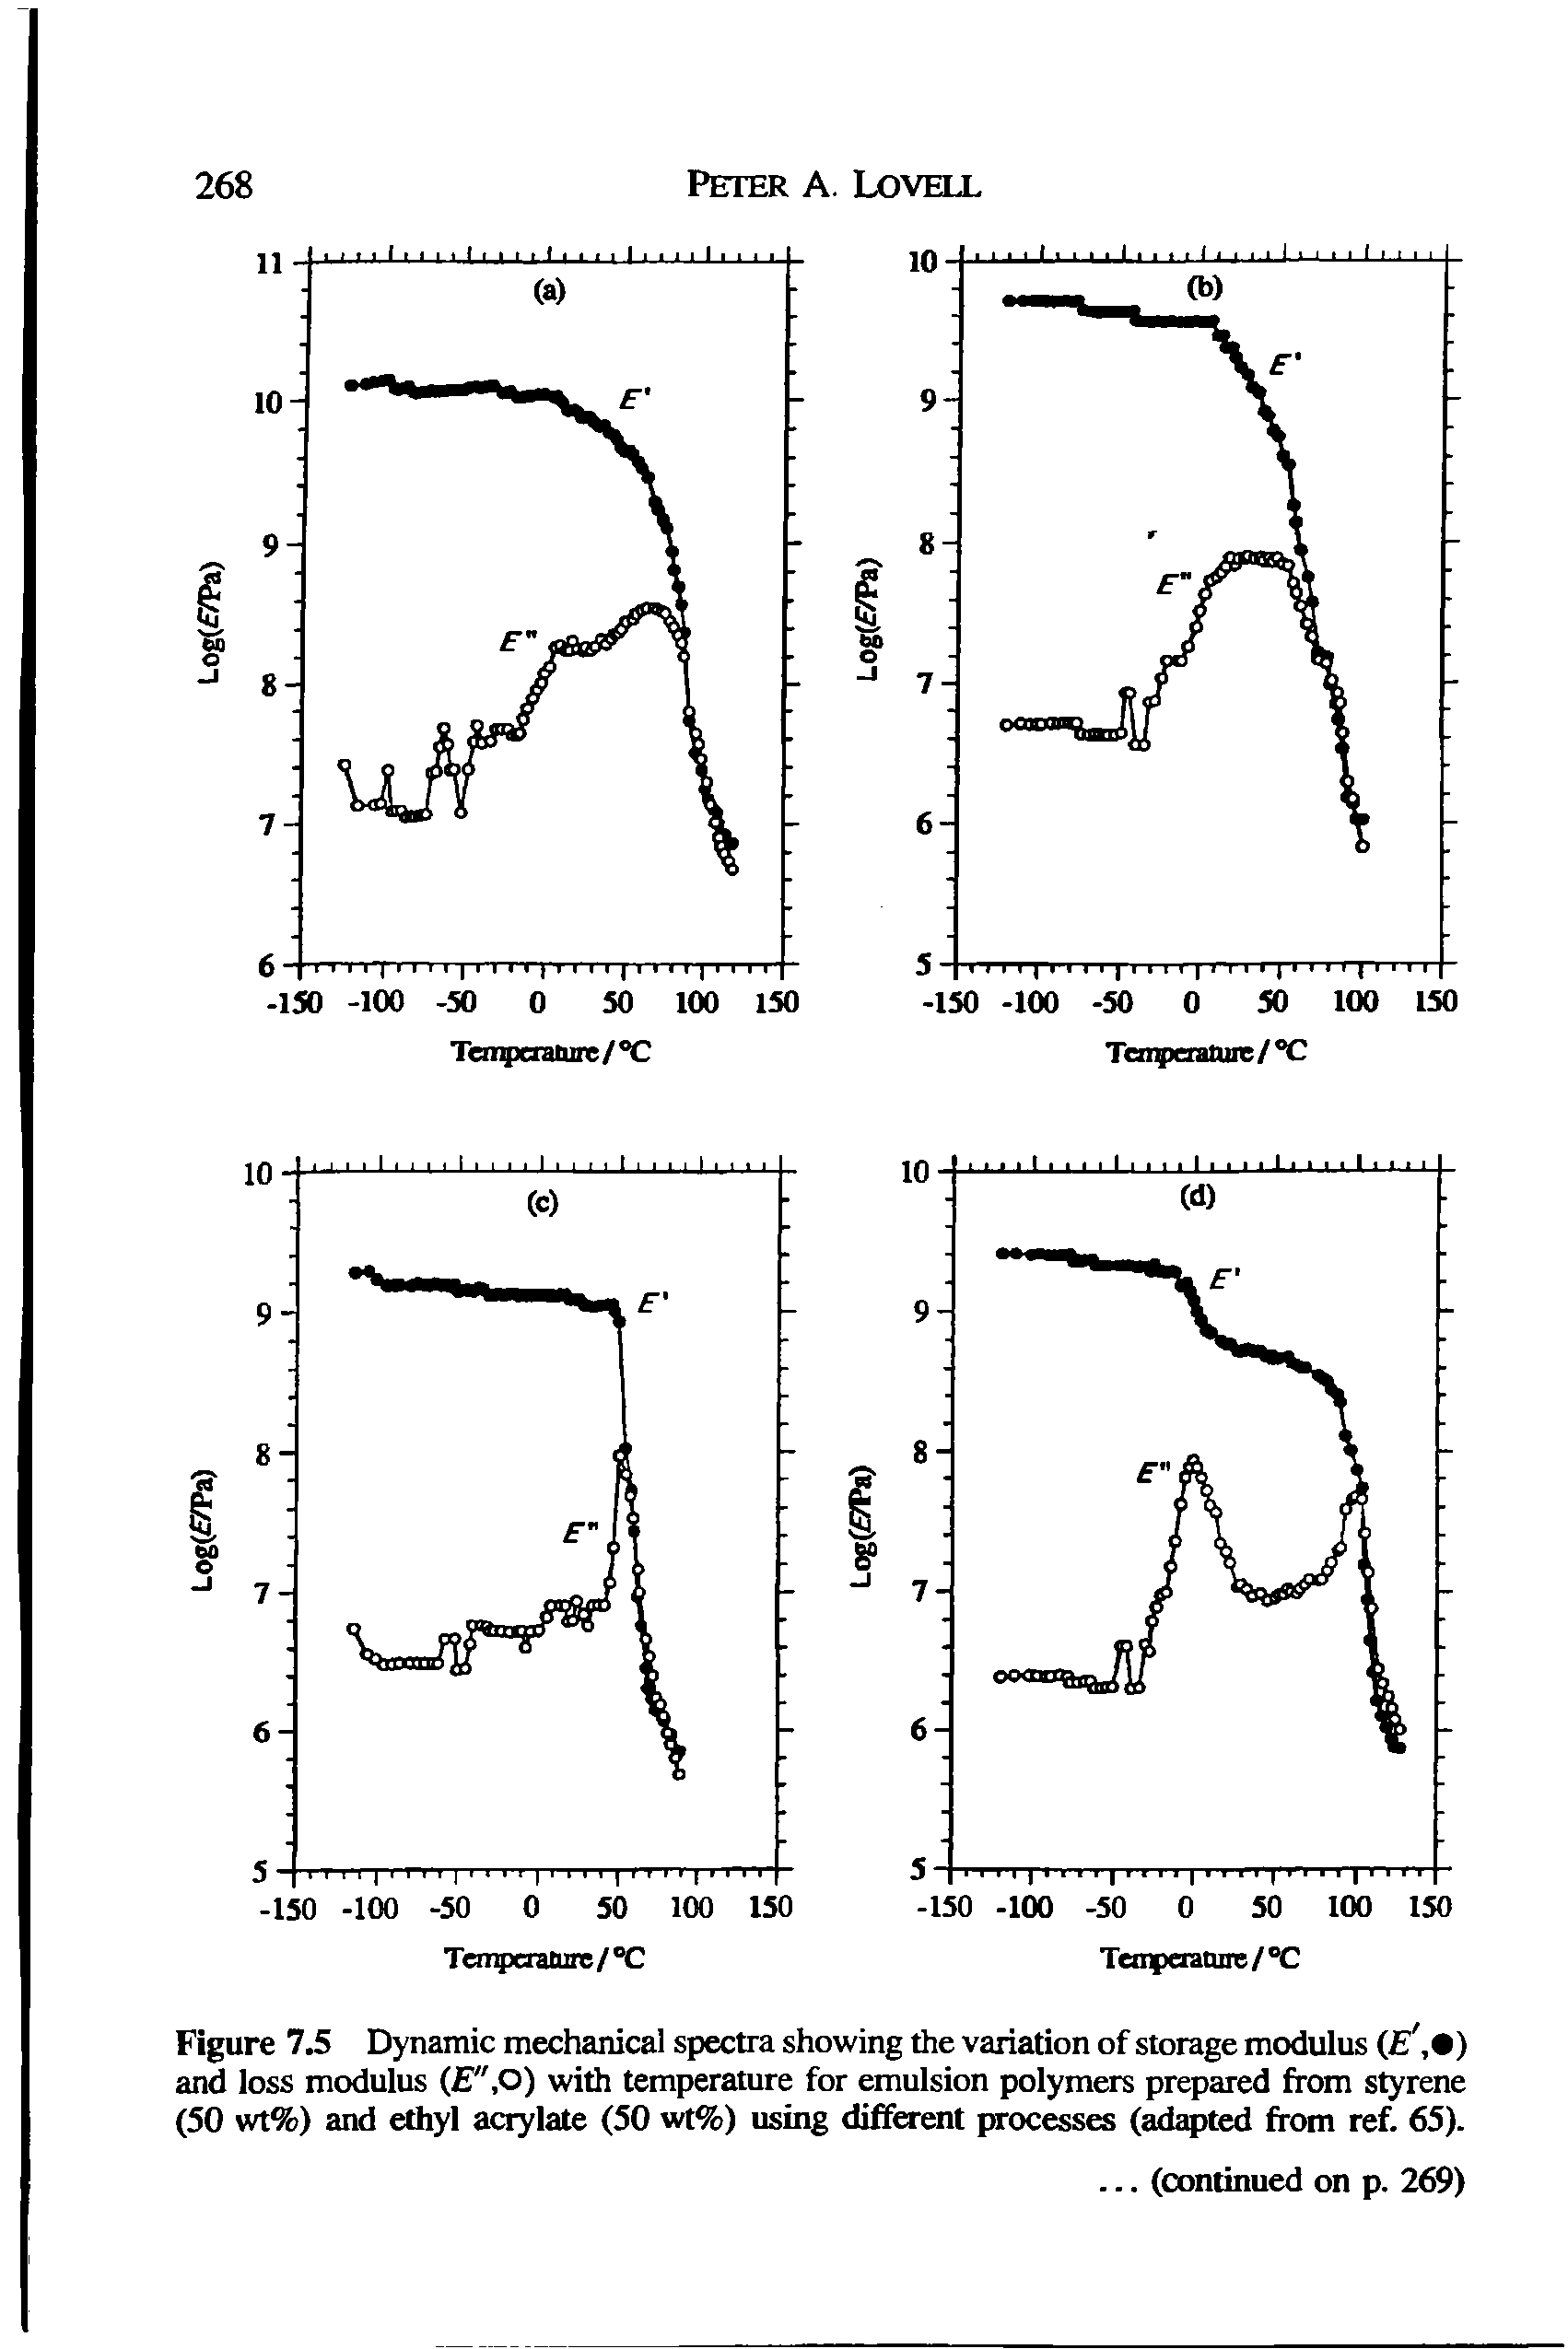 Figure 7.5 Dynamic mechanical spectra showing the variation of storage modulus (.S, 9) and loss modulus (E",0) with temperature for emulsion polymers prepared from styrene (50 wt%) and ethyl acrylate (50 wt%) using different processes (adapted from ref. 65).